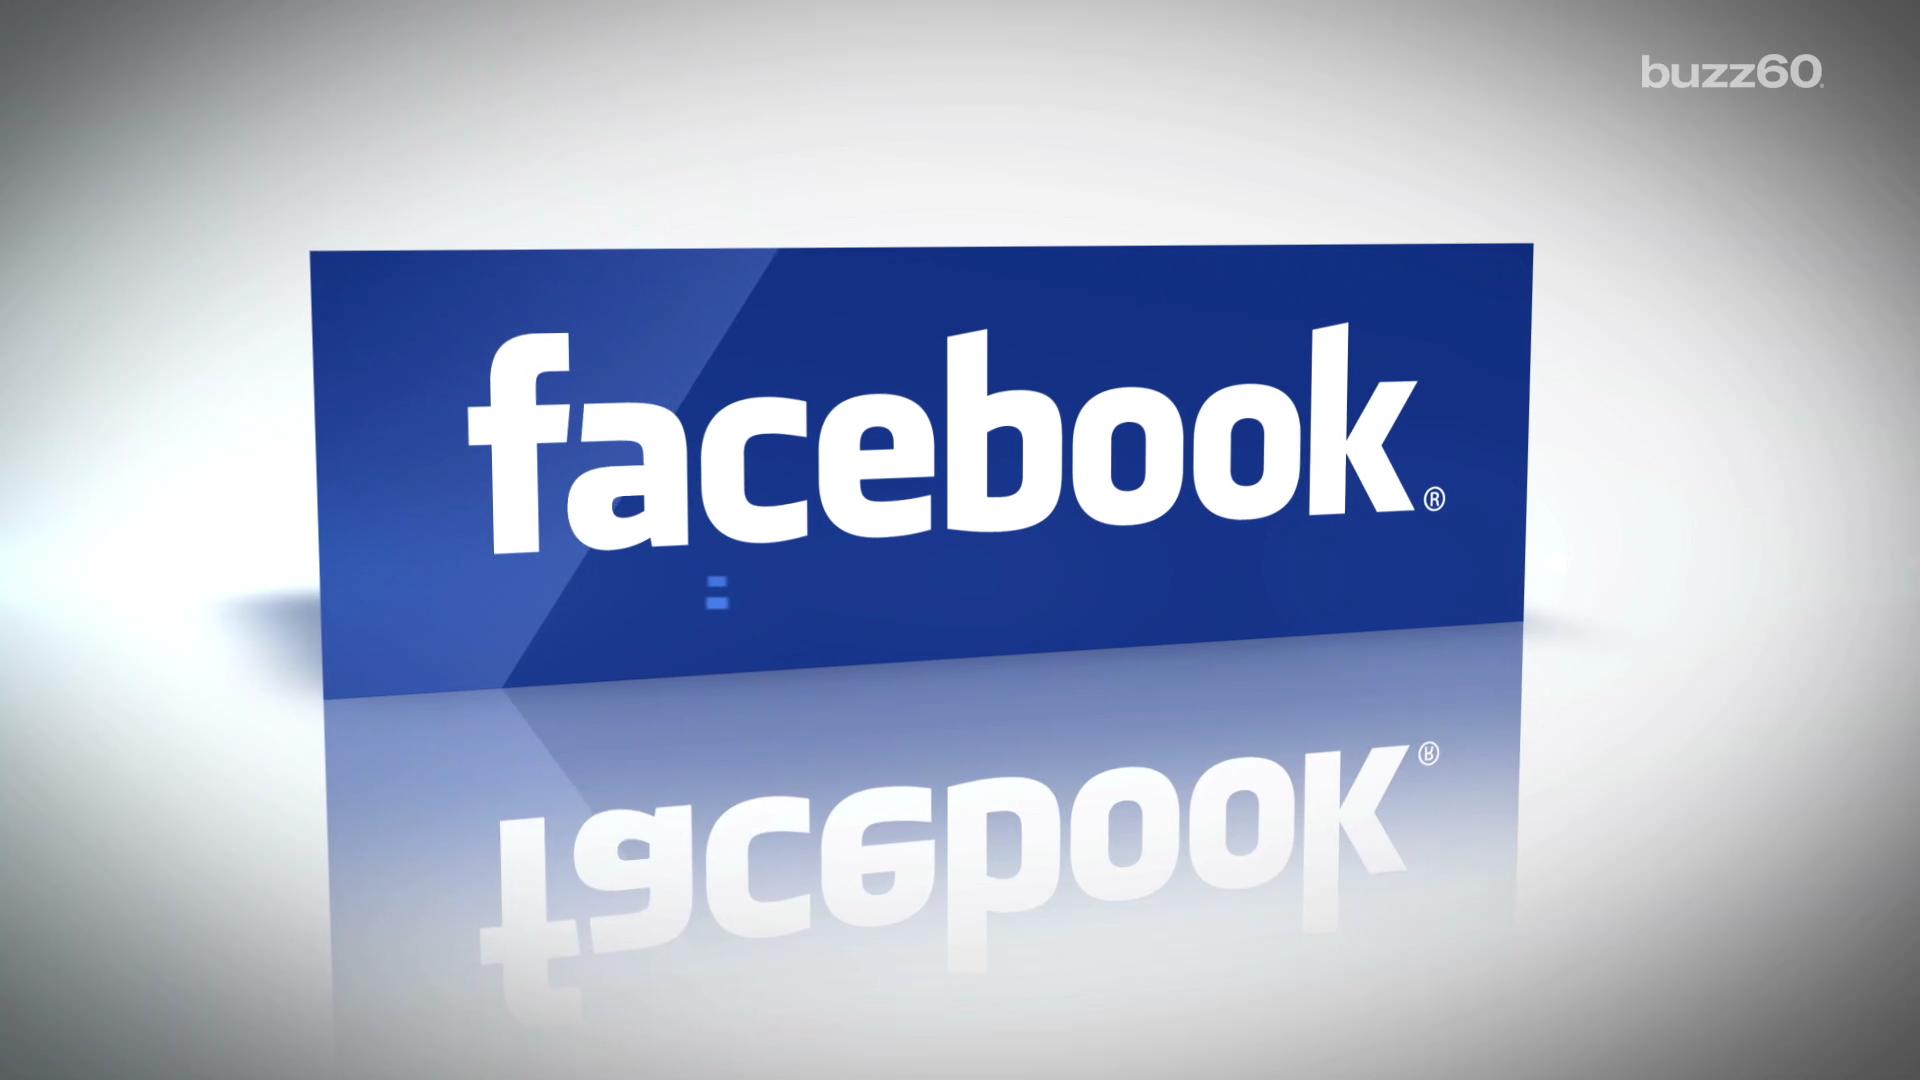 Dead Facebook Users Will Outnumber The Living - Facebook - HD Wallpaper 